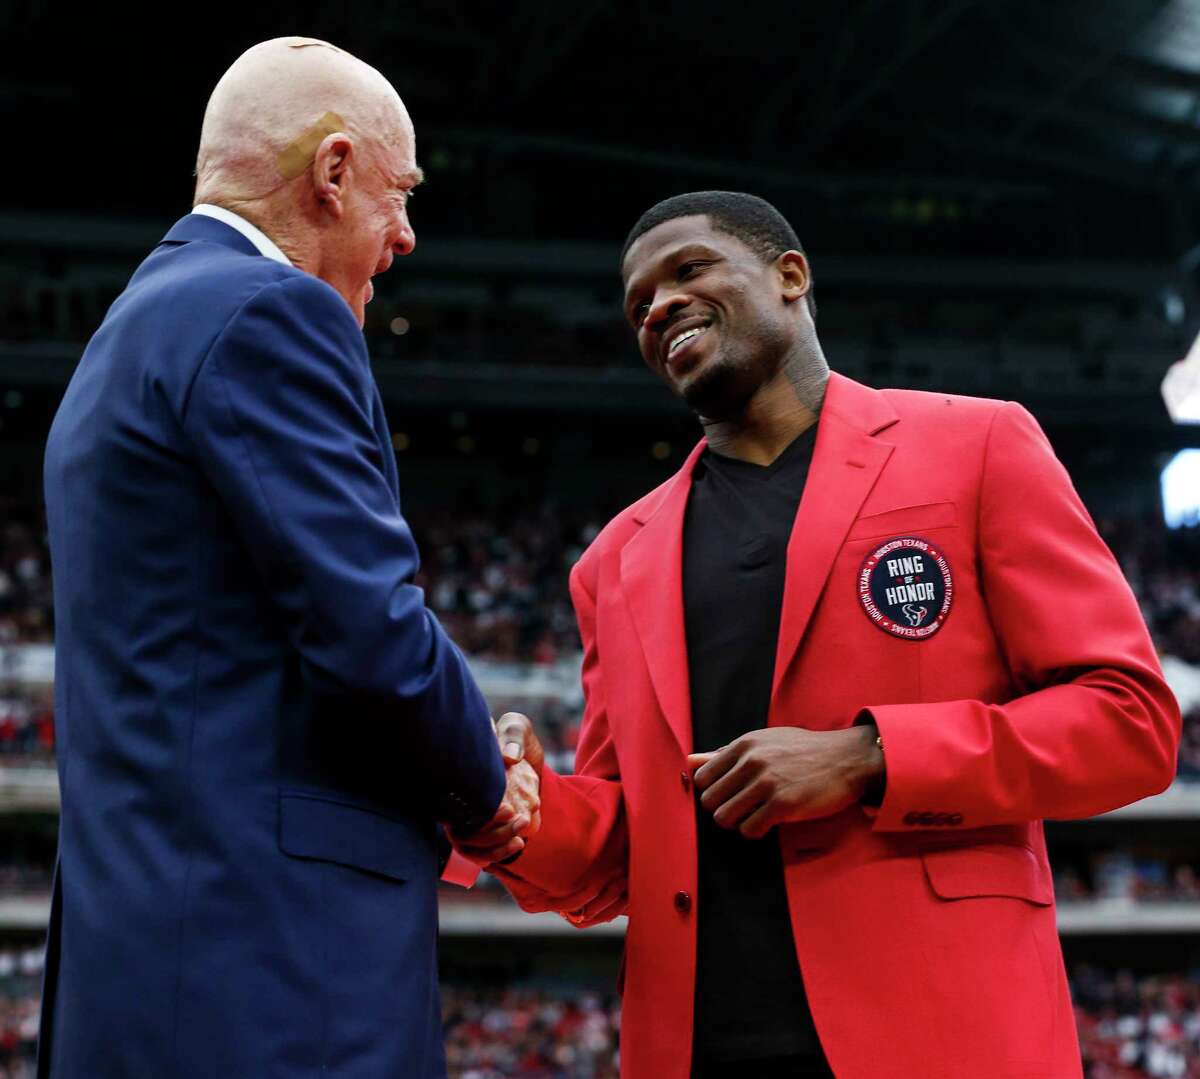 Texans owner Bob McNair, left, welcomes back Andre Johnson, the franchise's standard-bearer at wide receiver, on the day he became the first player to enter the team's Ring of Honor.